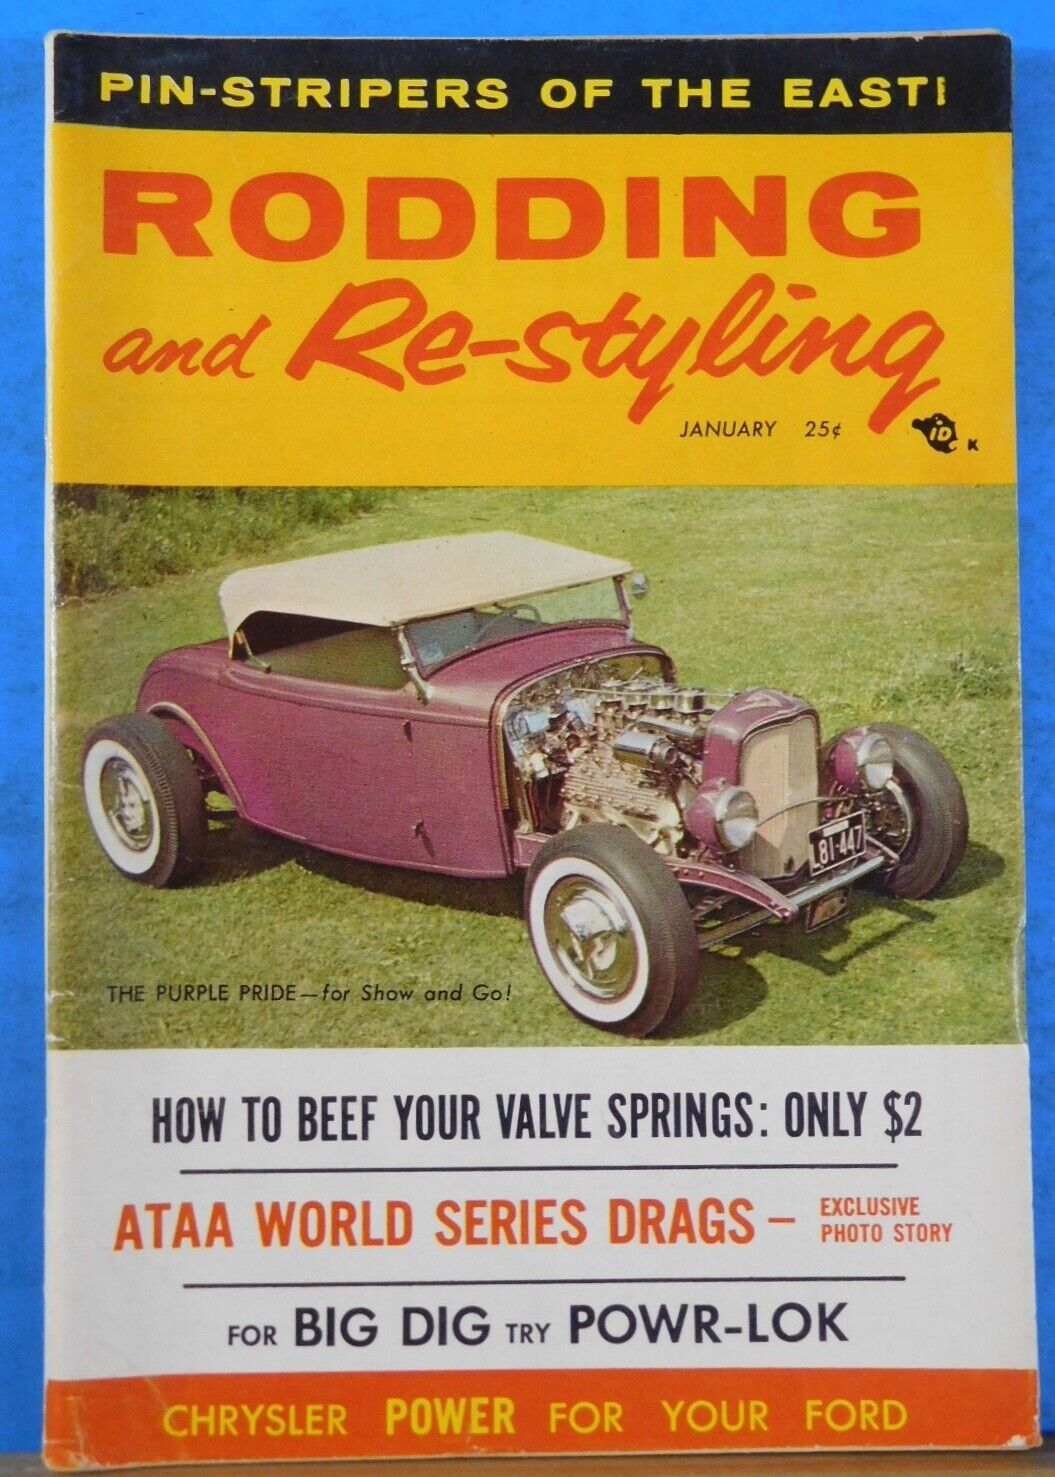 Rodding and Re-styling 1958 January Pin Stripers of the East